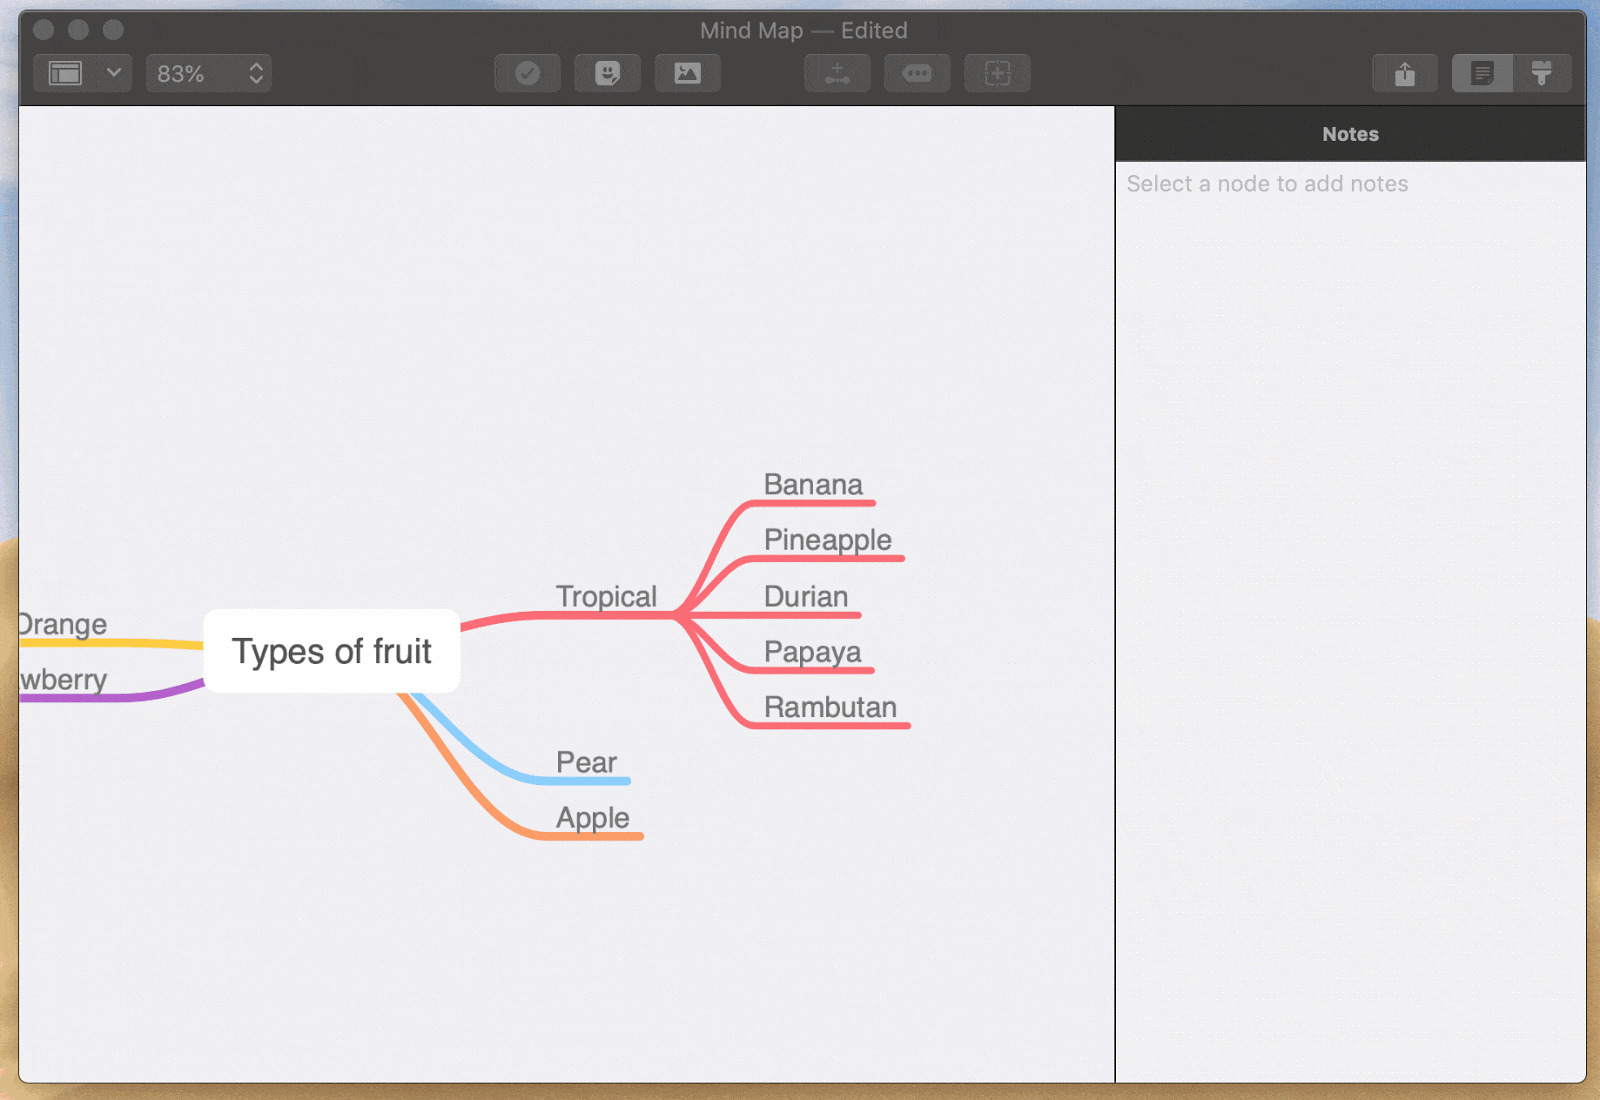 Mind map's Focus View mode